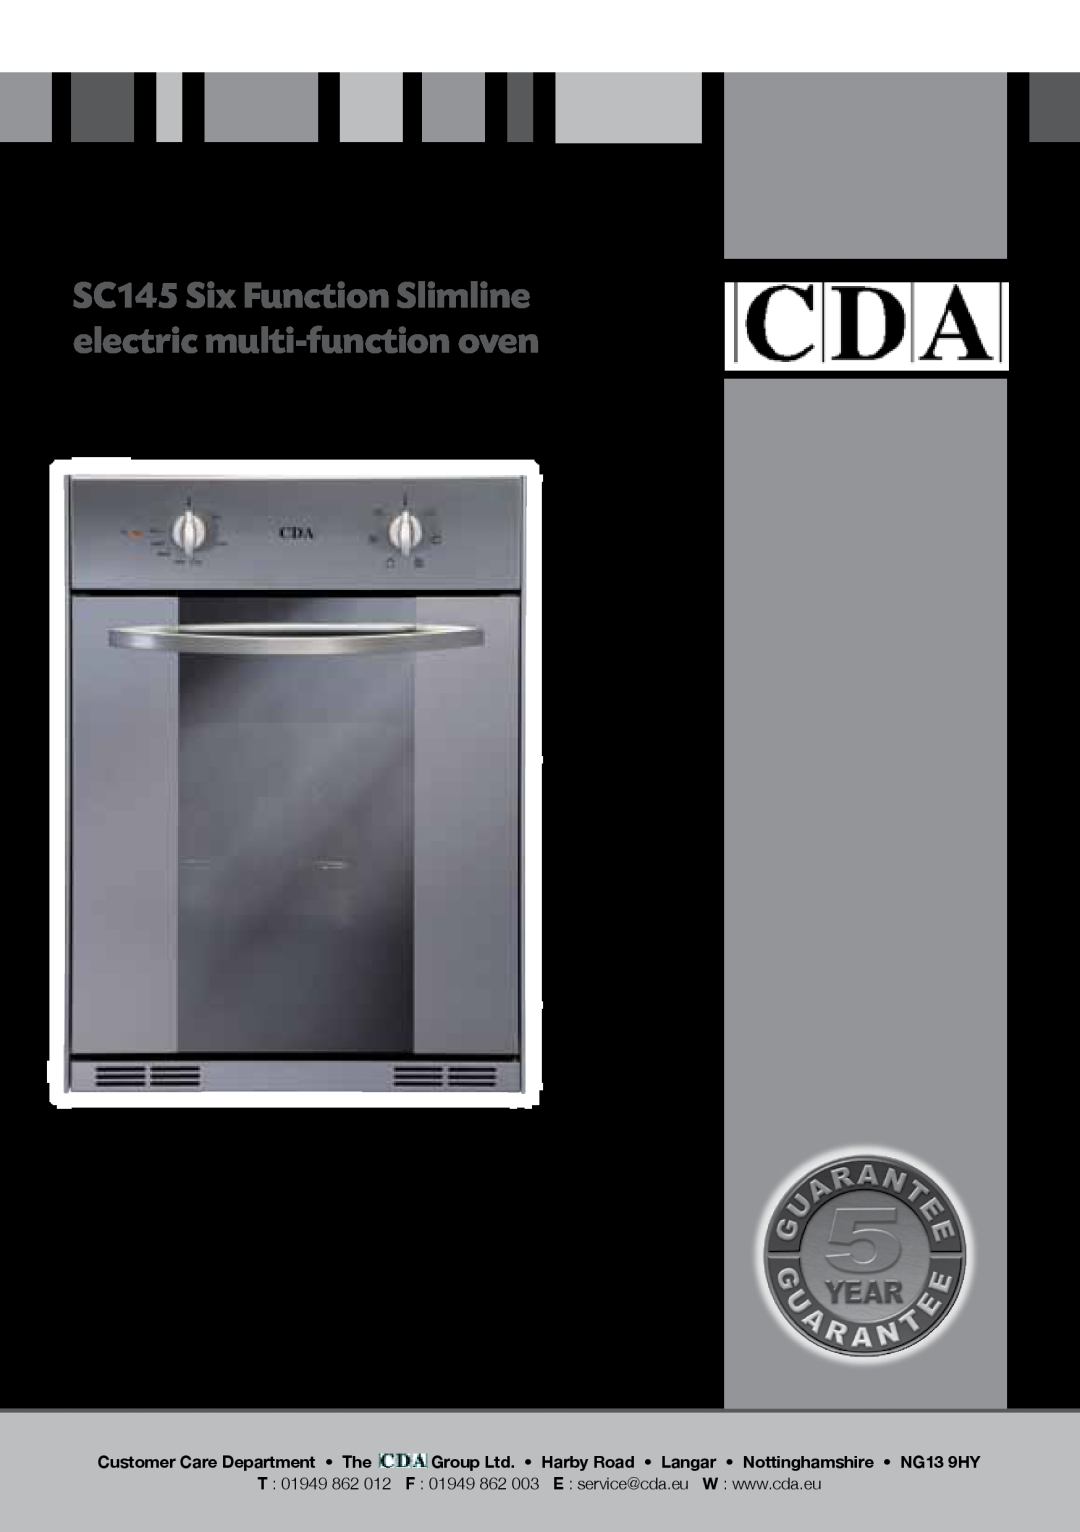 CDA manual Manual for Installation, Use and Maintenance, SC145 Six Function Slimline electric multi-function oven, T 